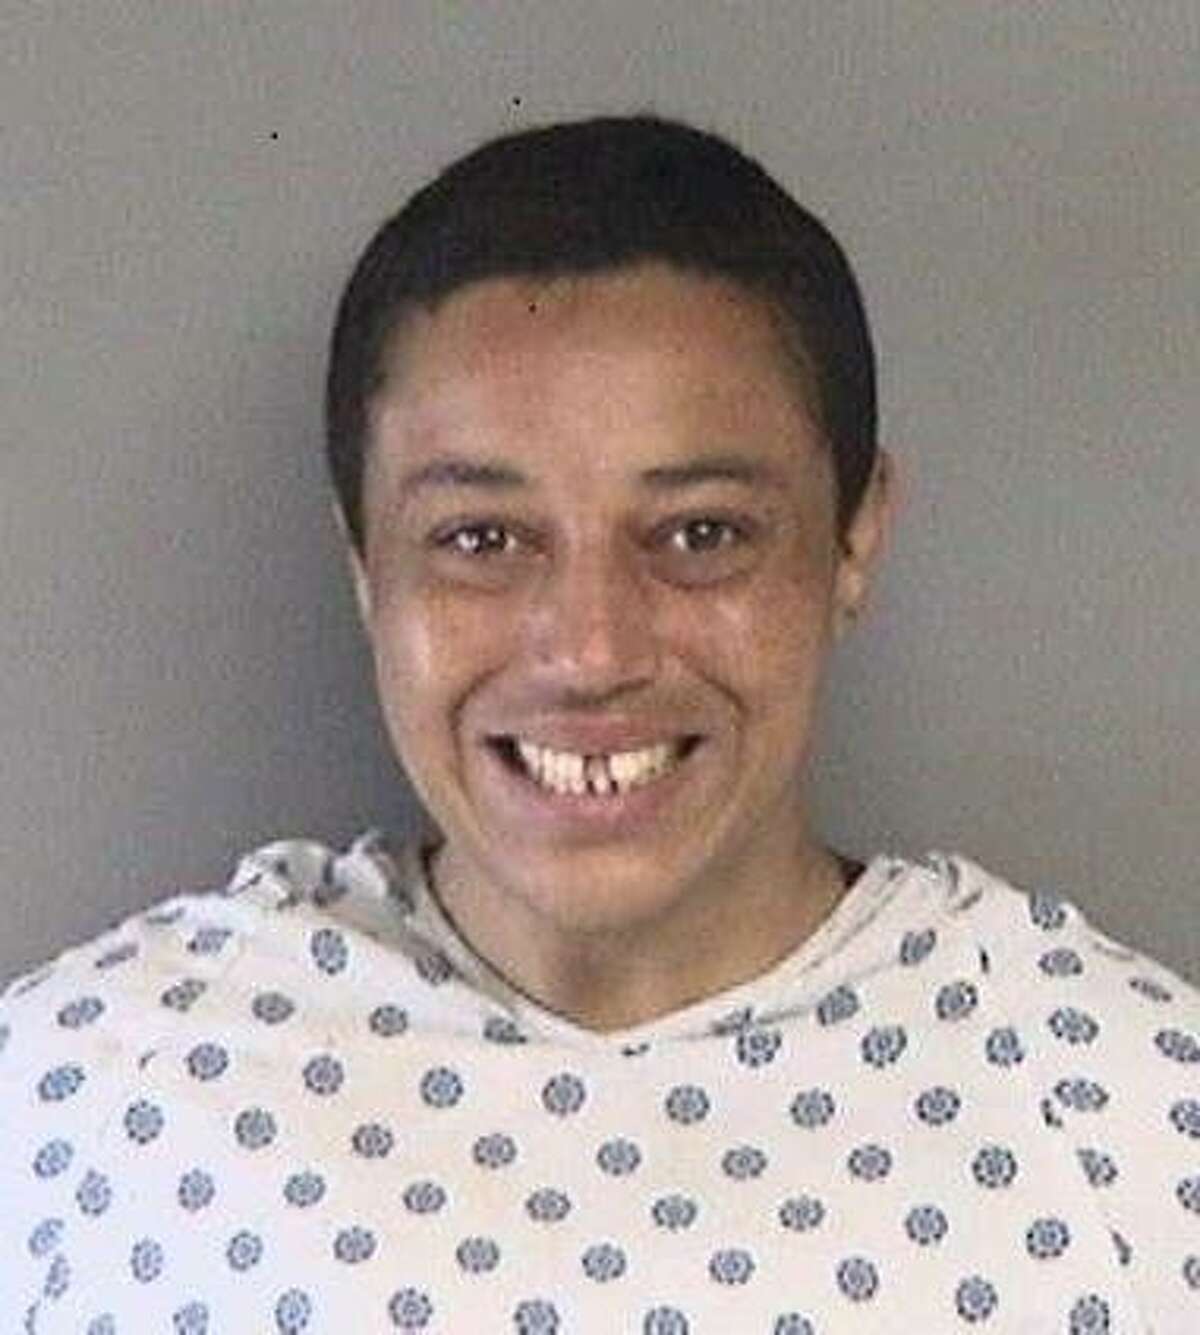 Sayyadina Thomas, 36, was arrested on suspicion of attempted murder after giving a toddler methamphetamine on a public playground in Berkeley, police said.